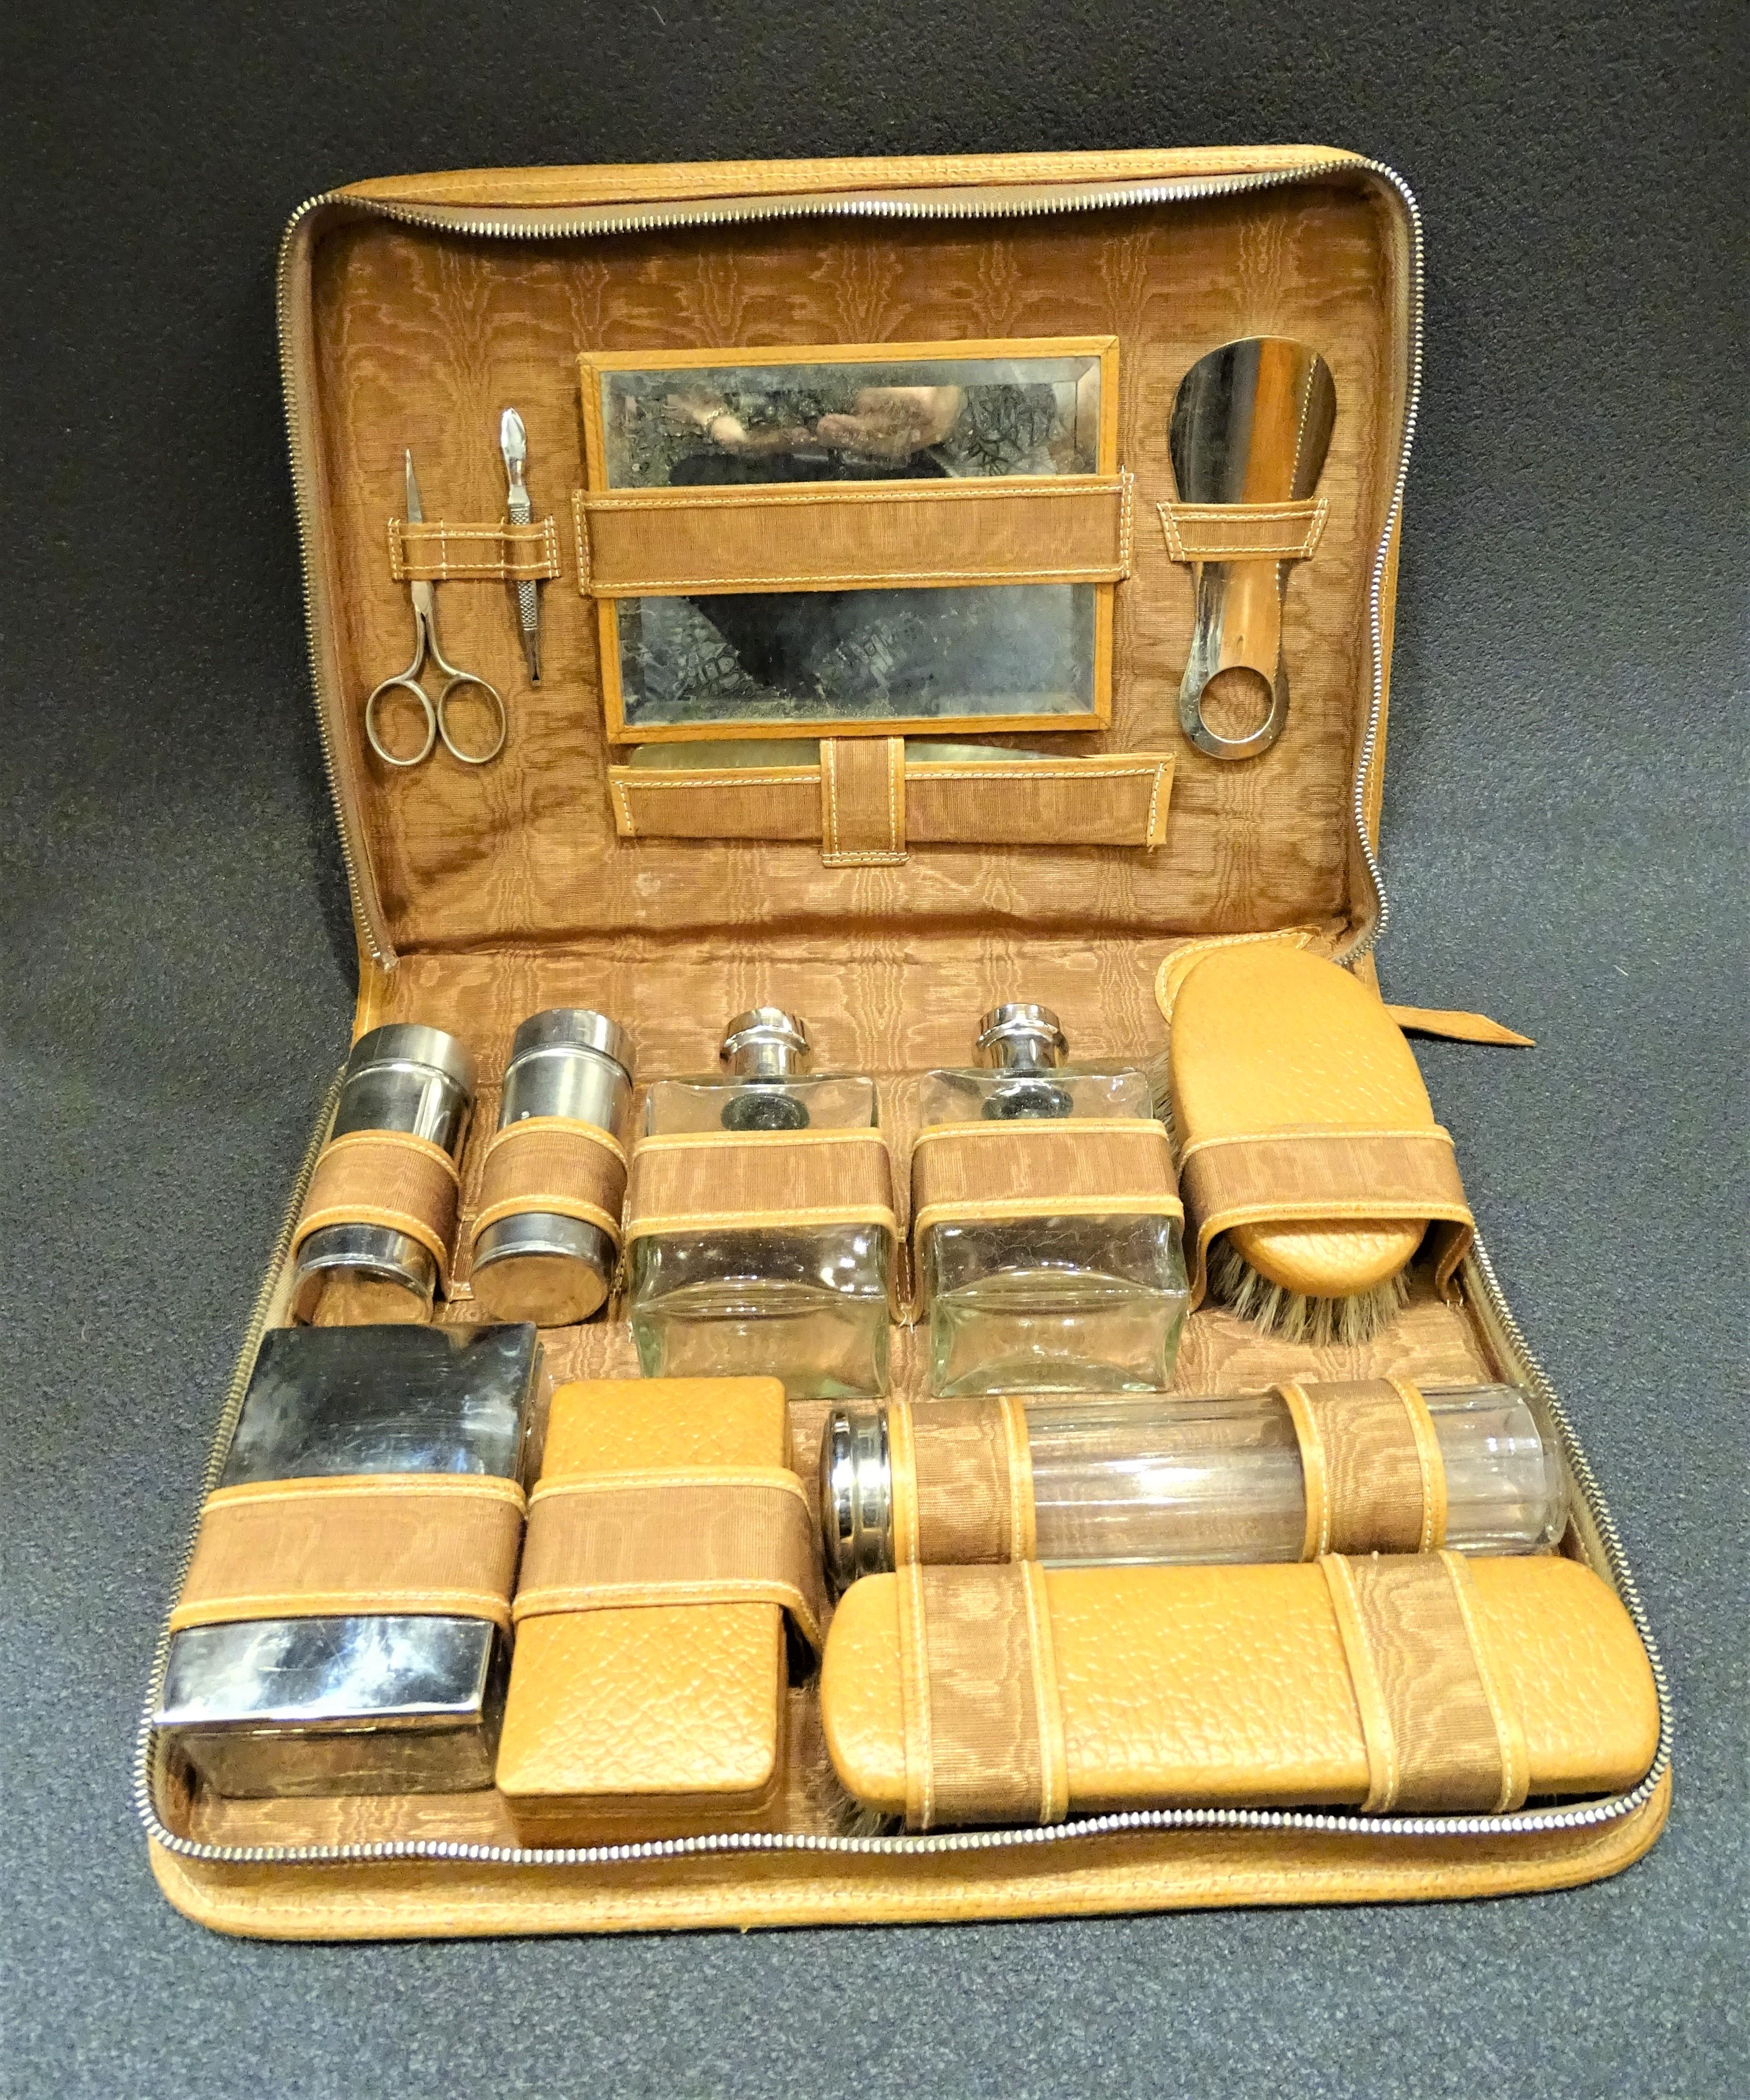 Stunning case in men's toilette leather, Art Deco, France, circa 1930, brand new. In cognac color extraordinary leather

Set composed of blown glass cans, leather boxes, scissors, antler comb, mirror, steel canisters etc... in perfect condition.